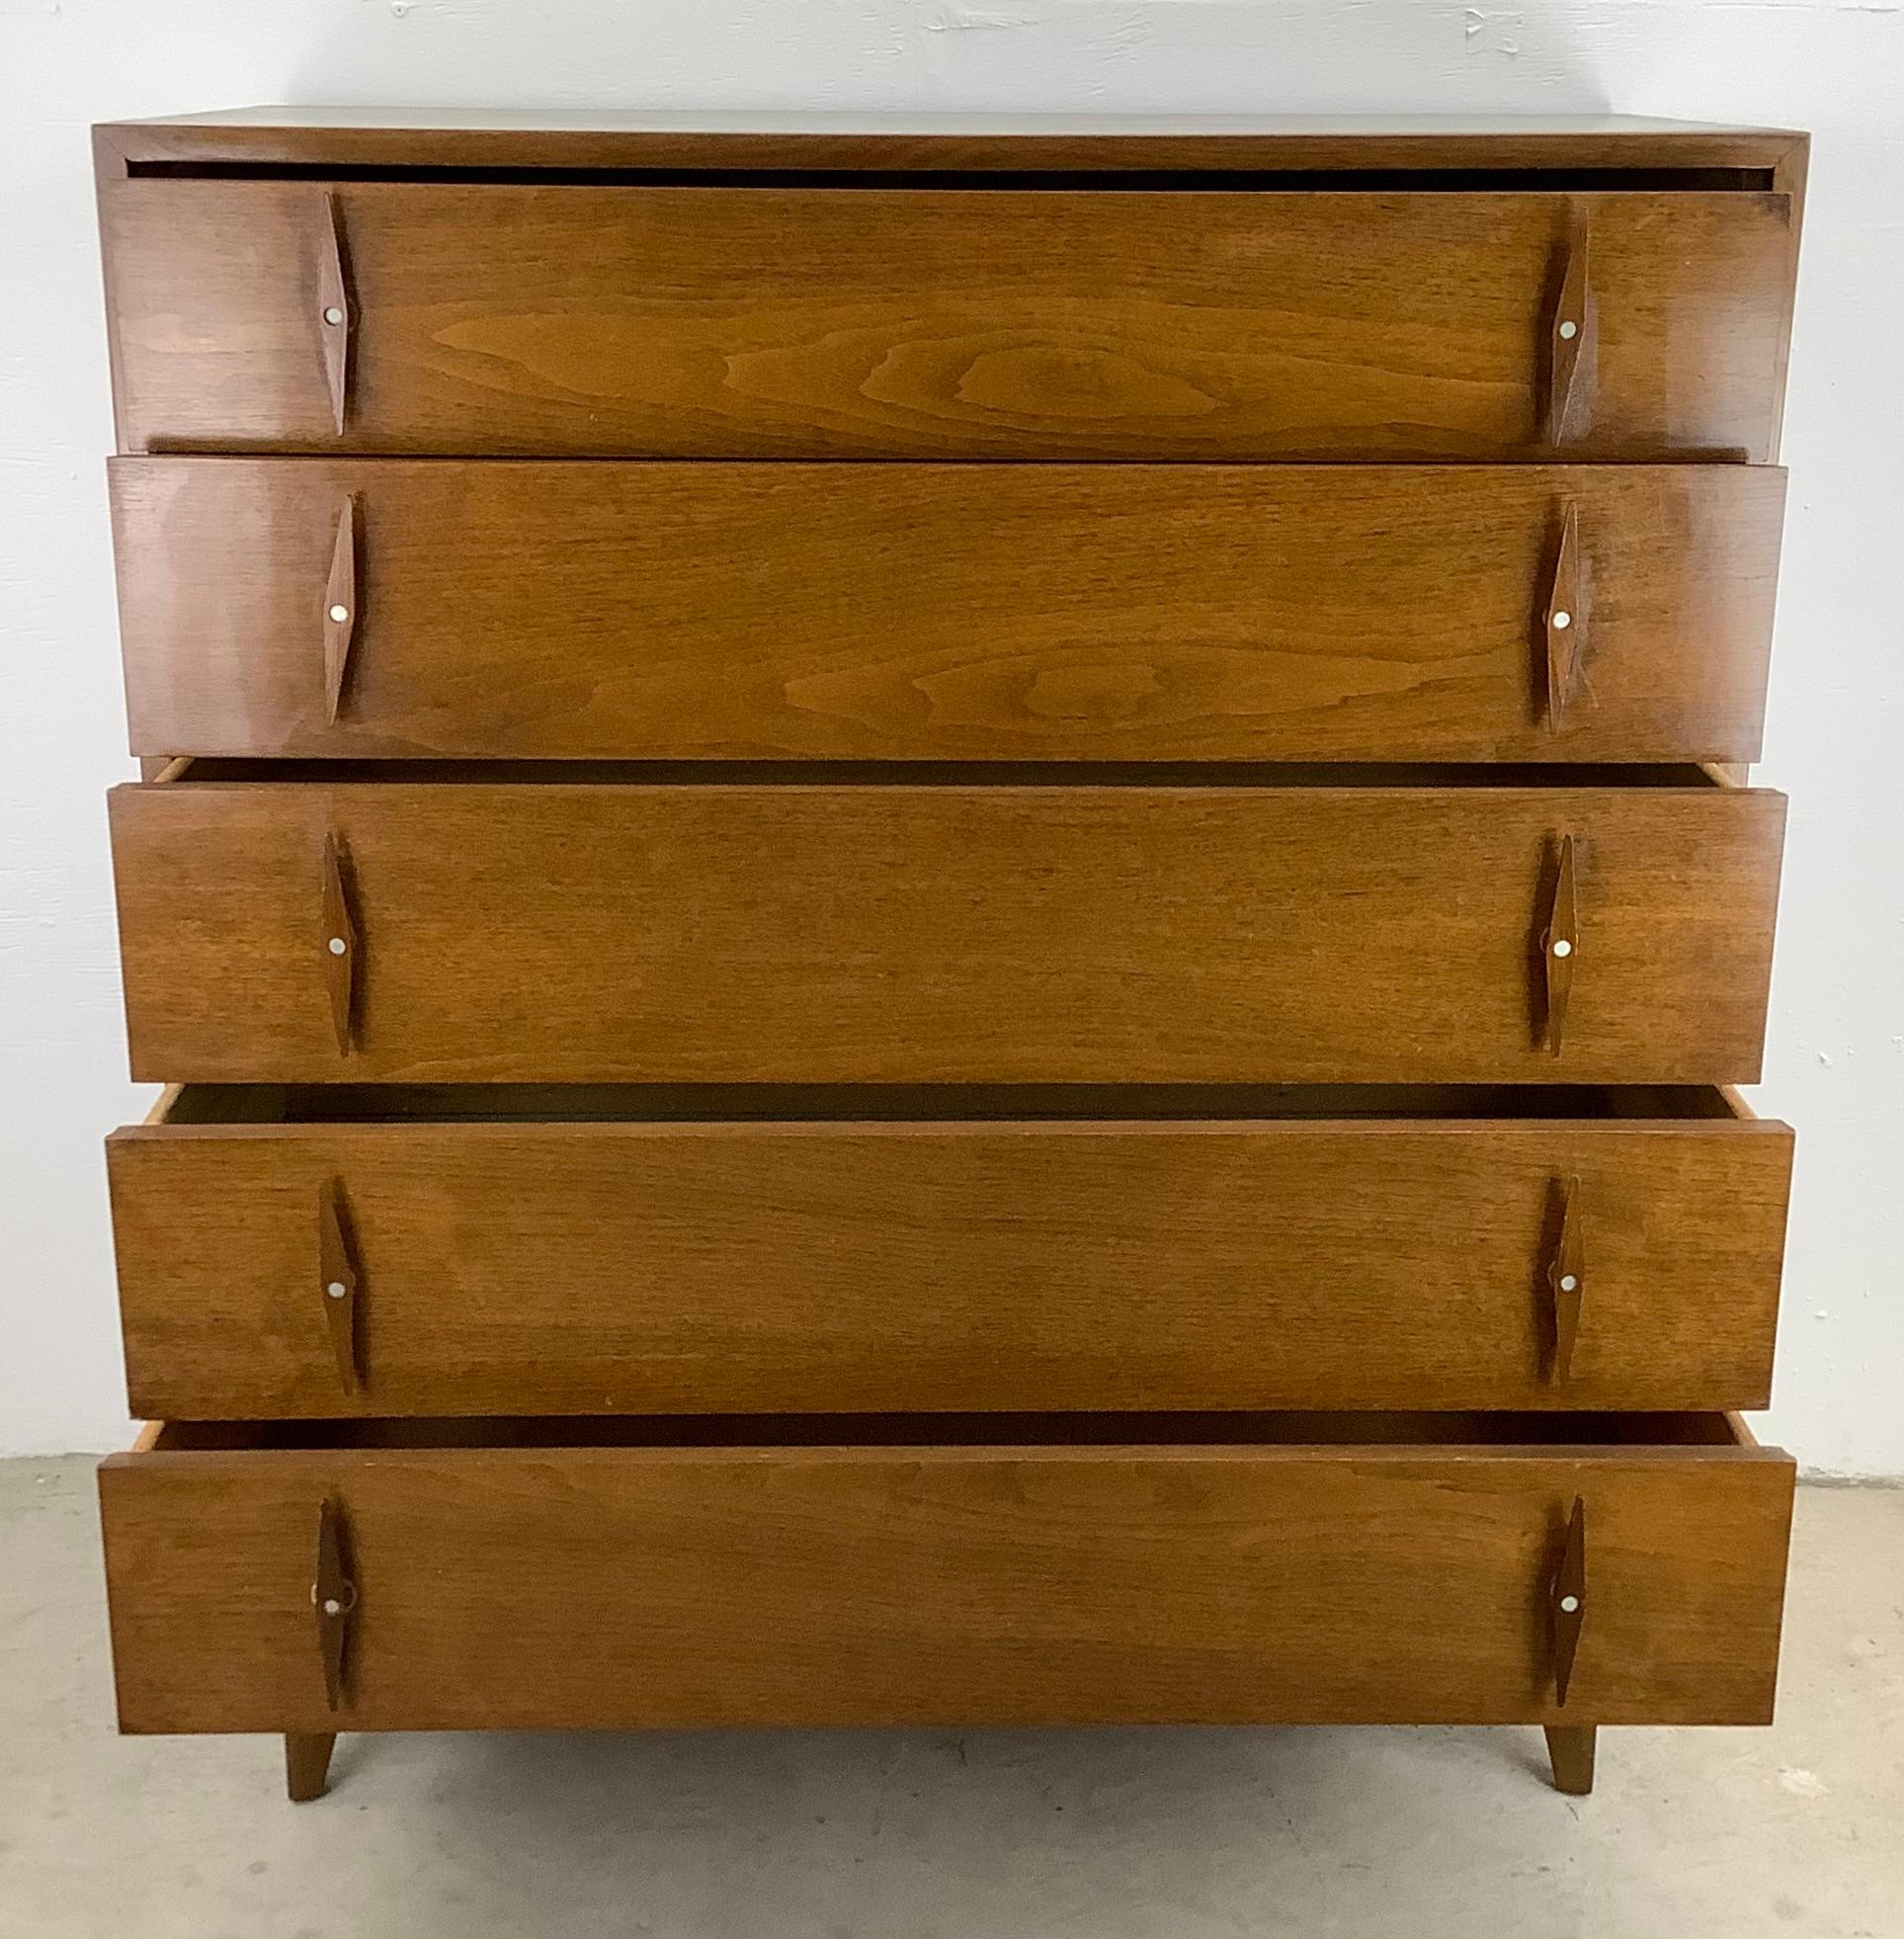 This striking vintage walnut five drawer Highboy Dresser from American of Martinsville is a captivating and functional piece that brings mid-century charm to your bedroom decor. With its striking carved wood pointed handles, this dresser adds a high